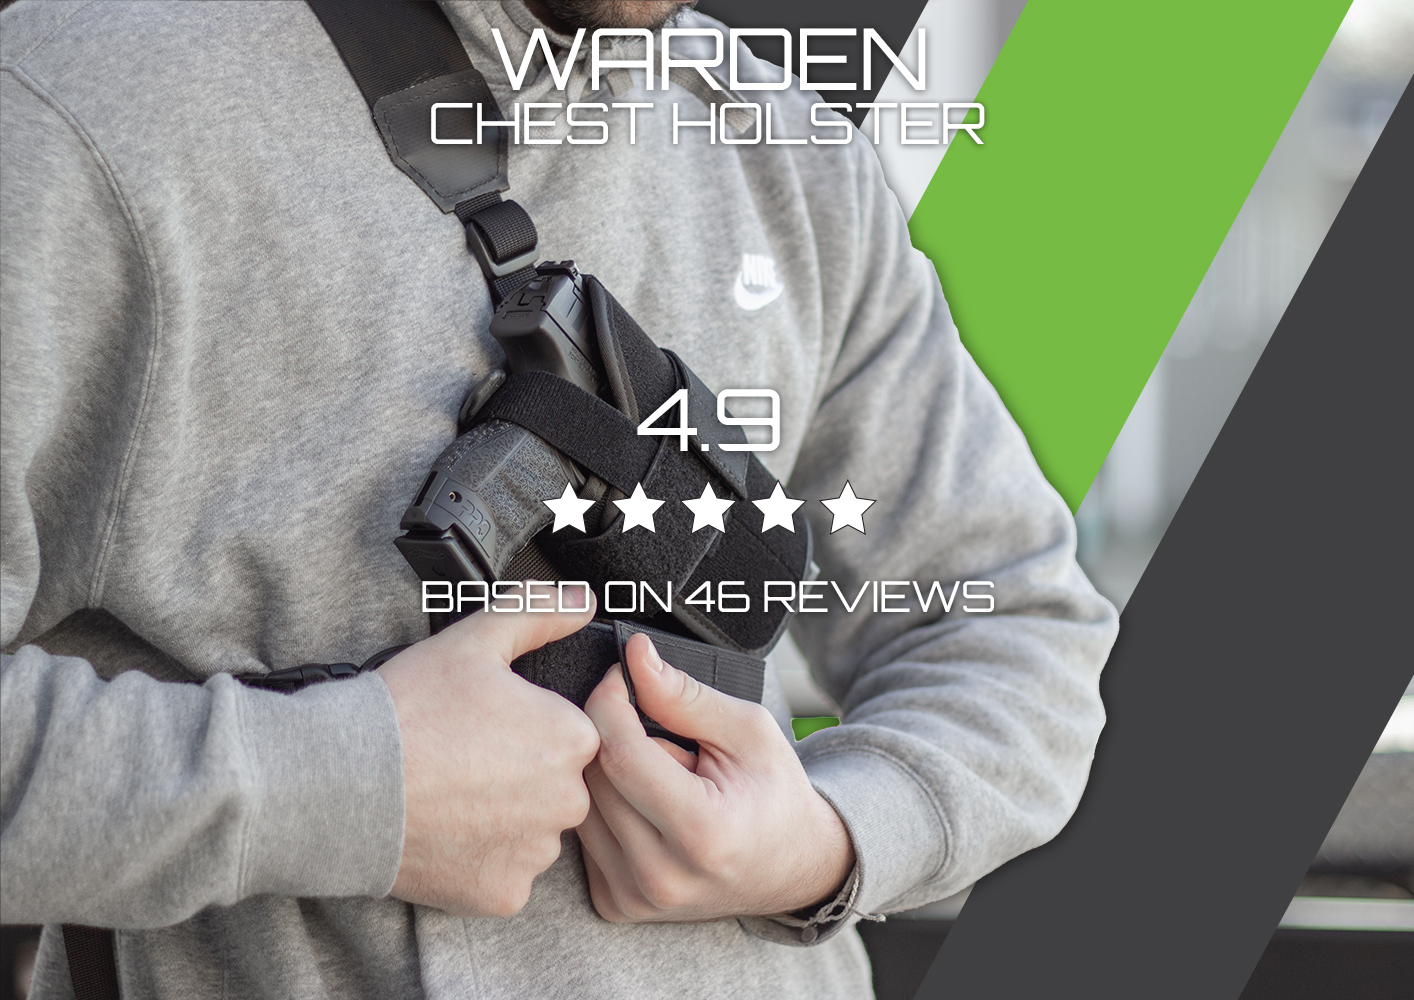 Elite Survival Warden Chest Holster - Tactical Holster for Comfortable and Secure Carry of Firearms. Lightweight and Adjustable. Shop Now!